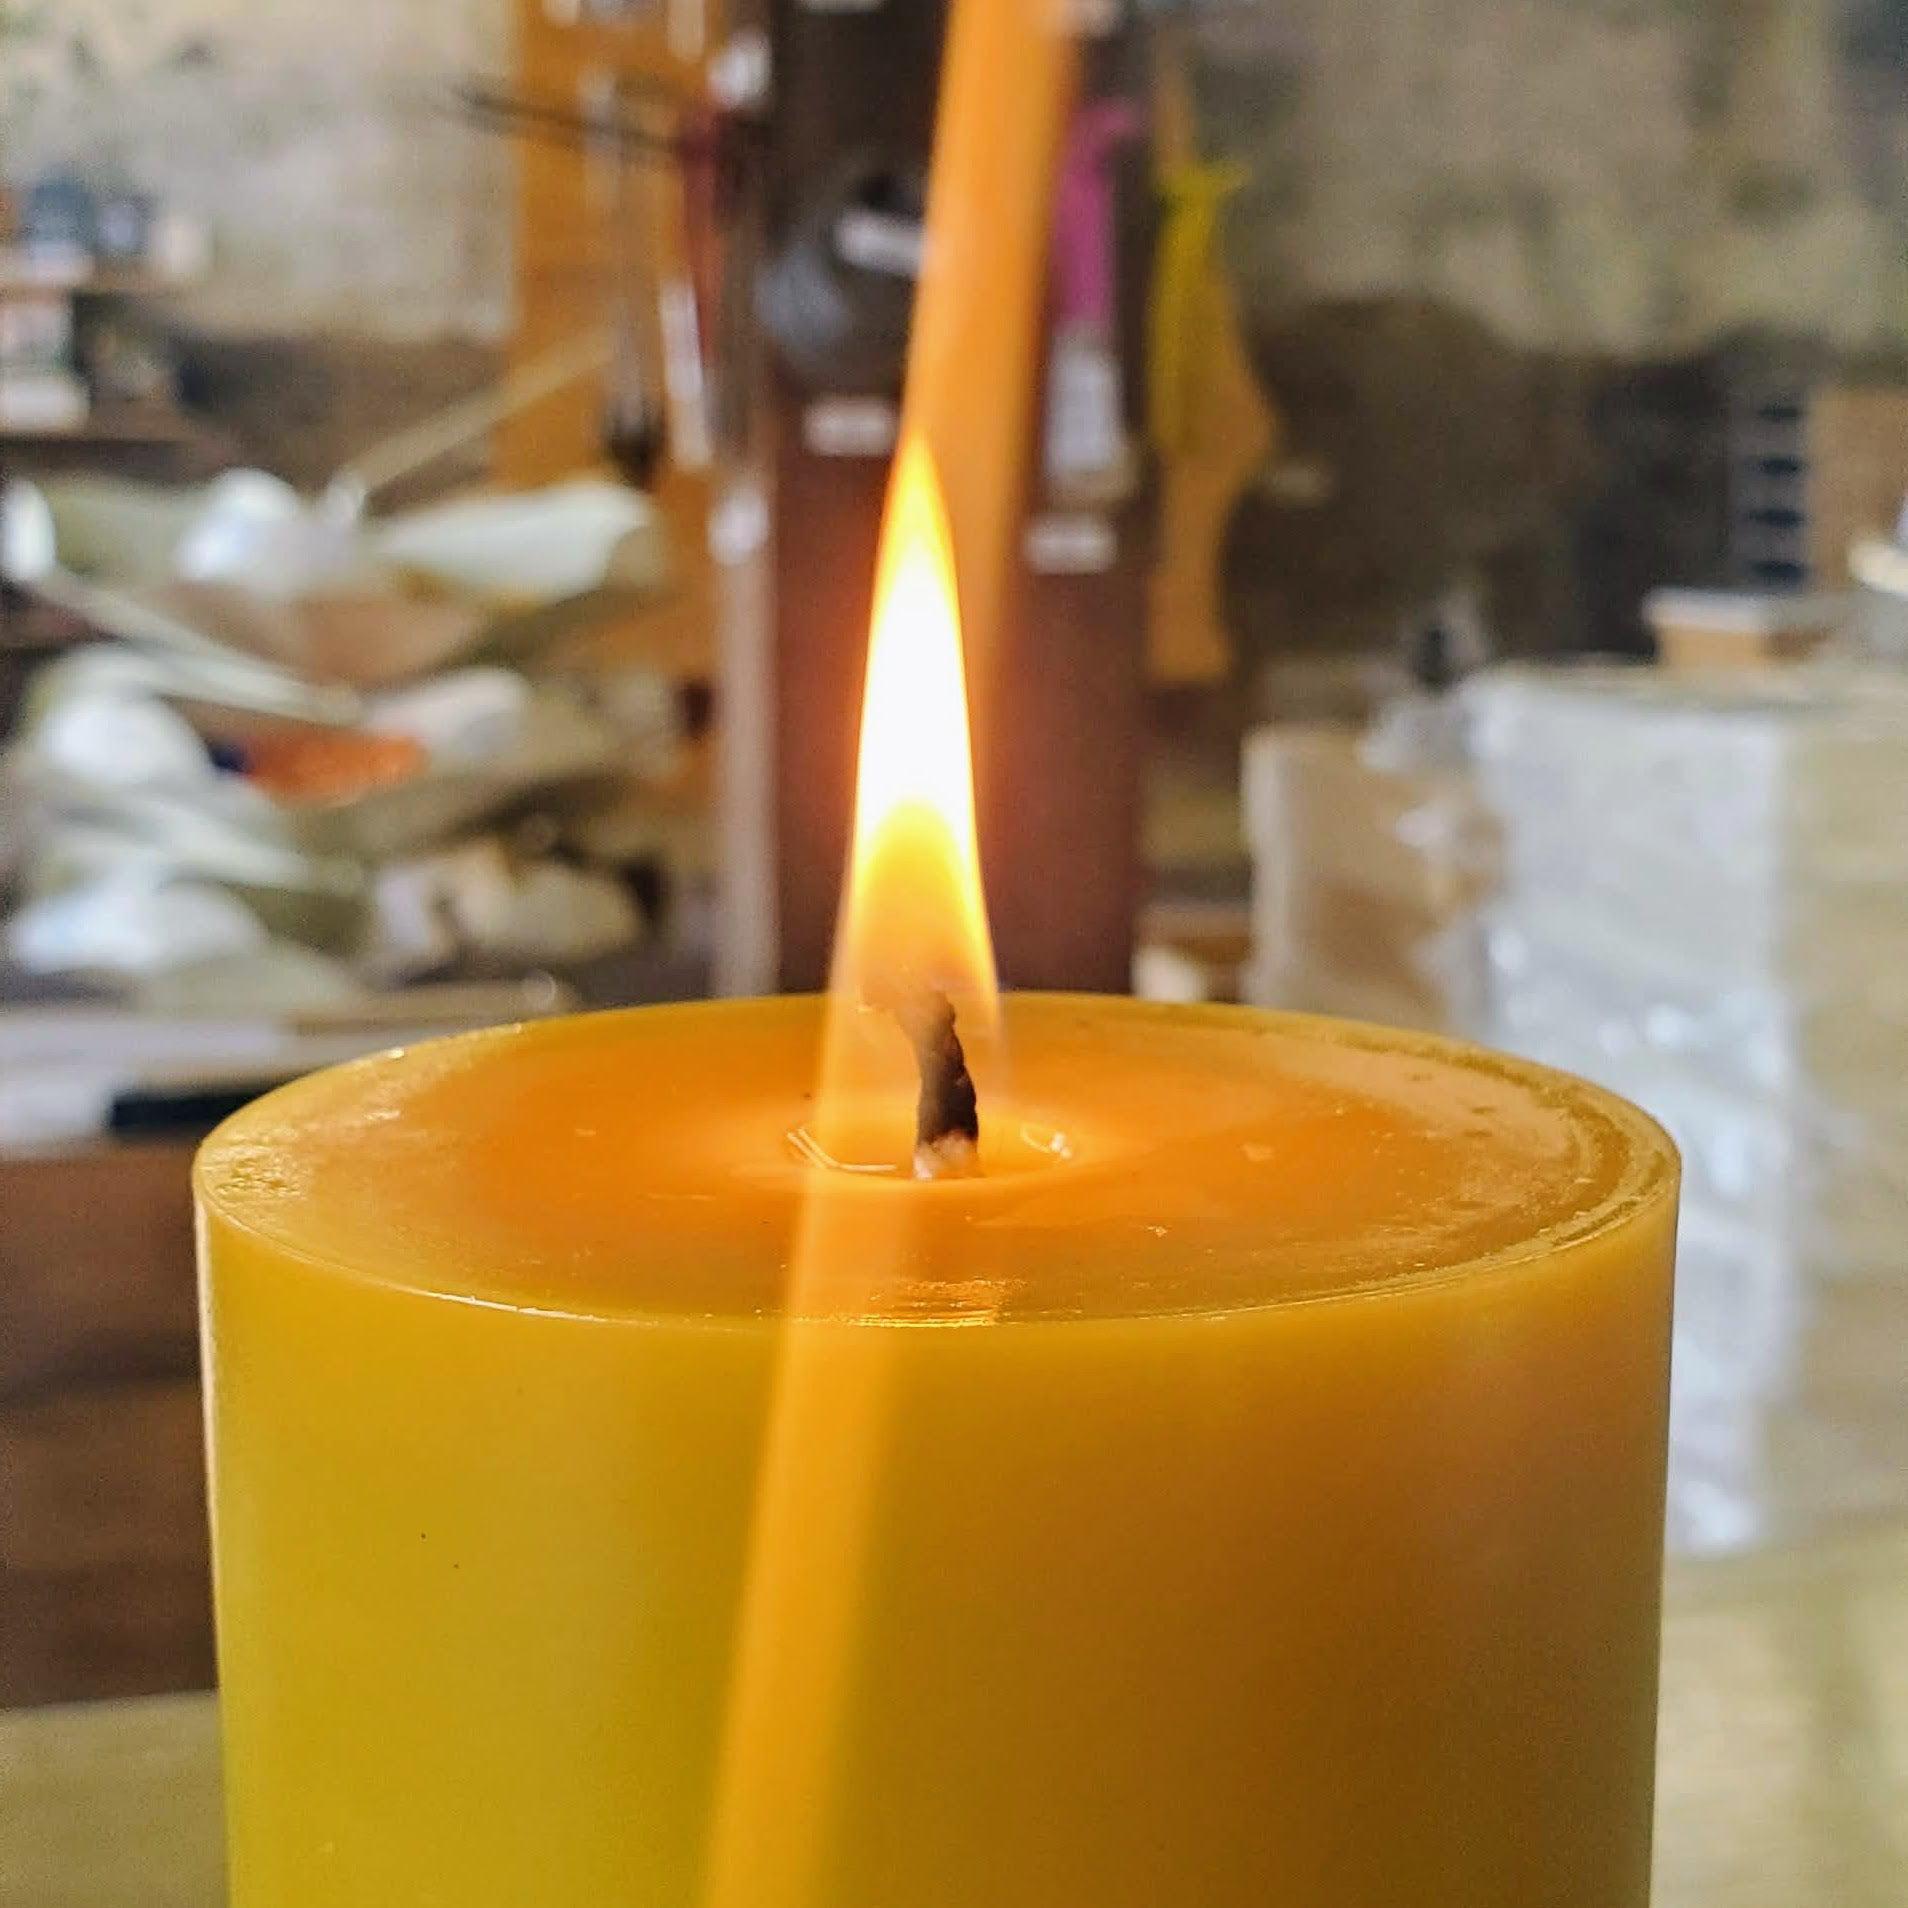 Pair of 7/8 inch Bees Wax Candles